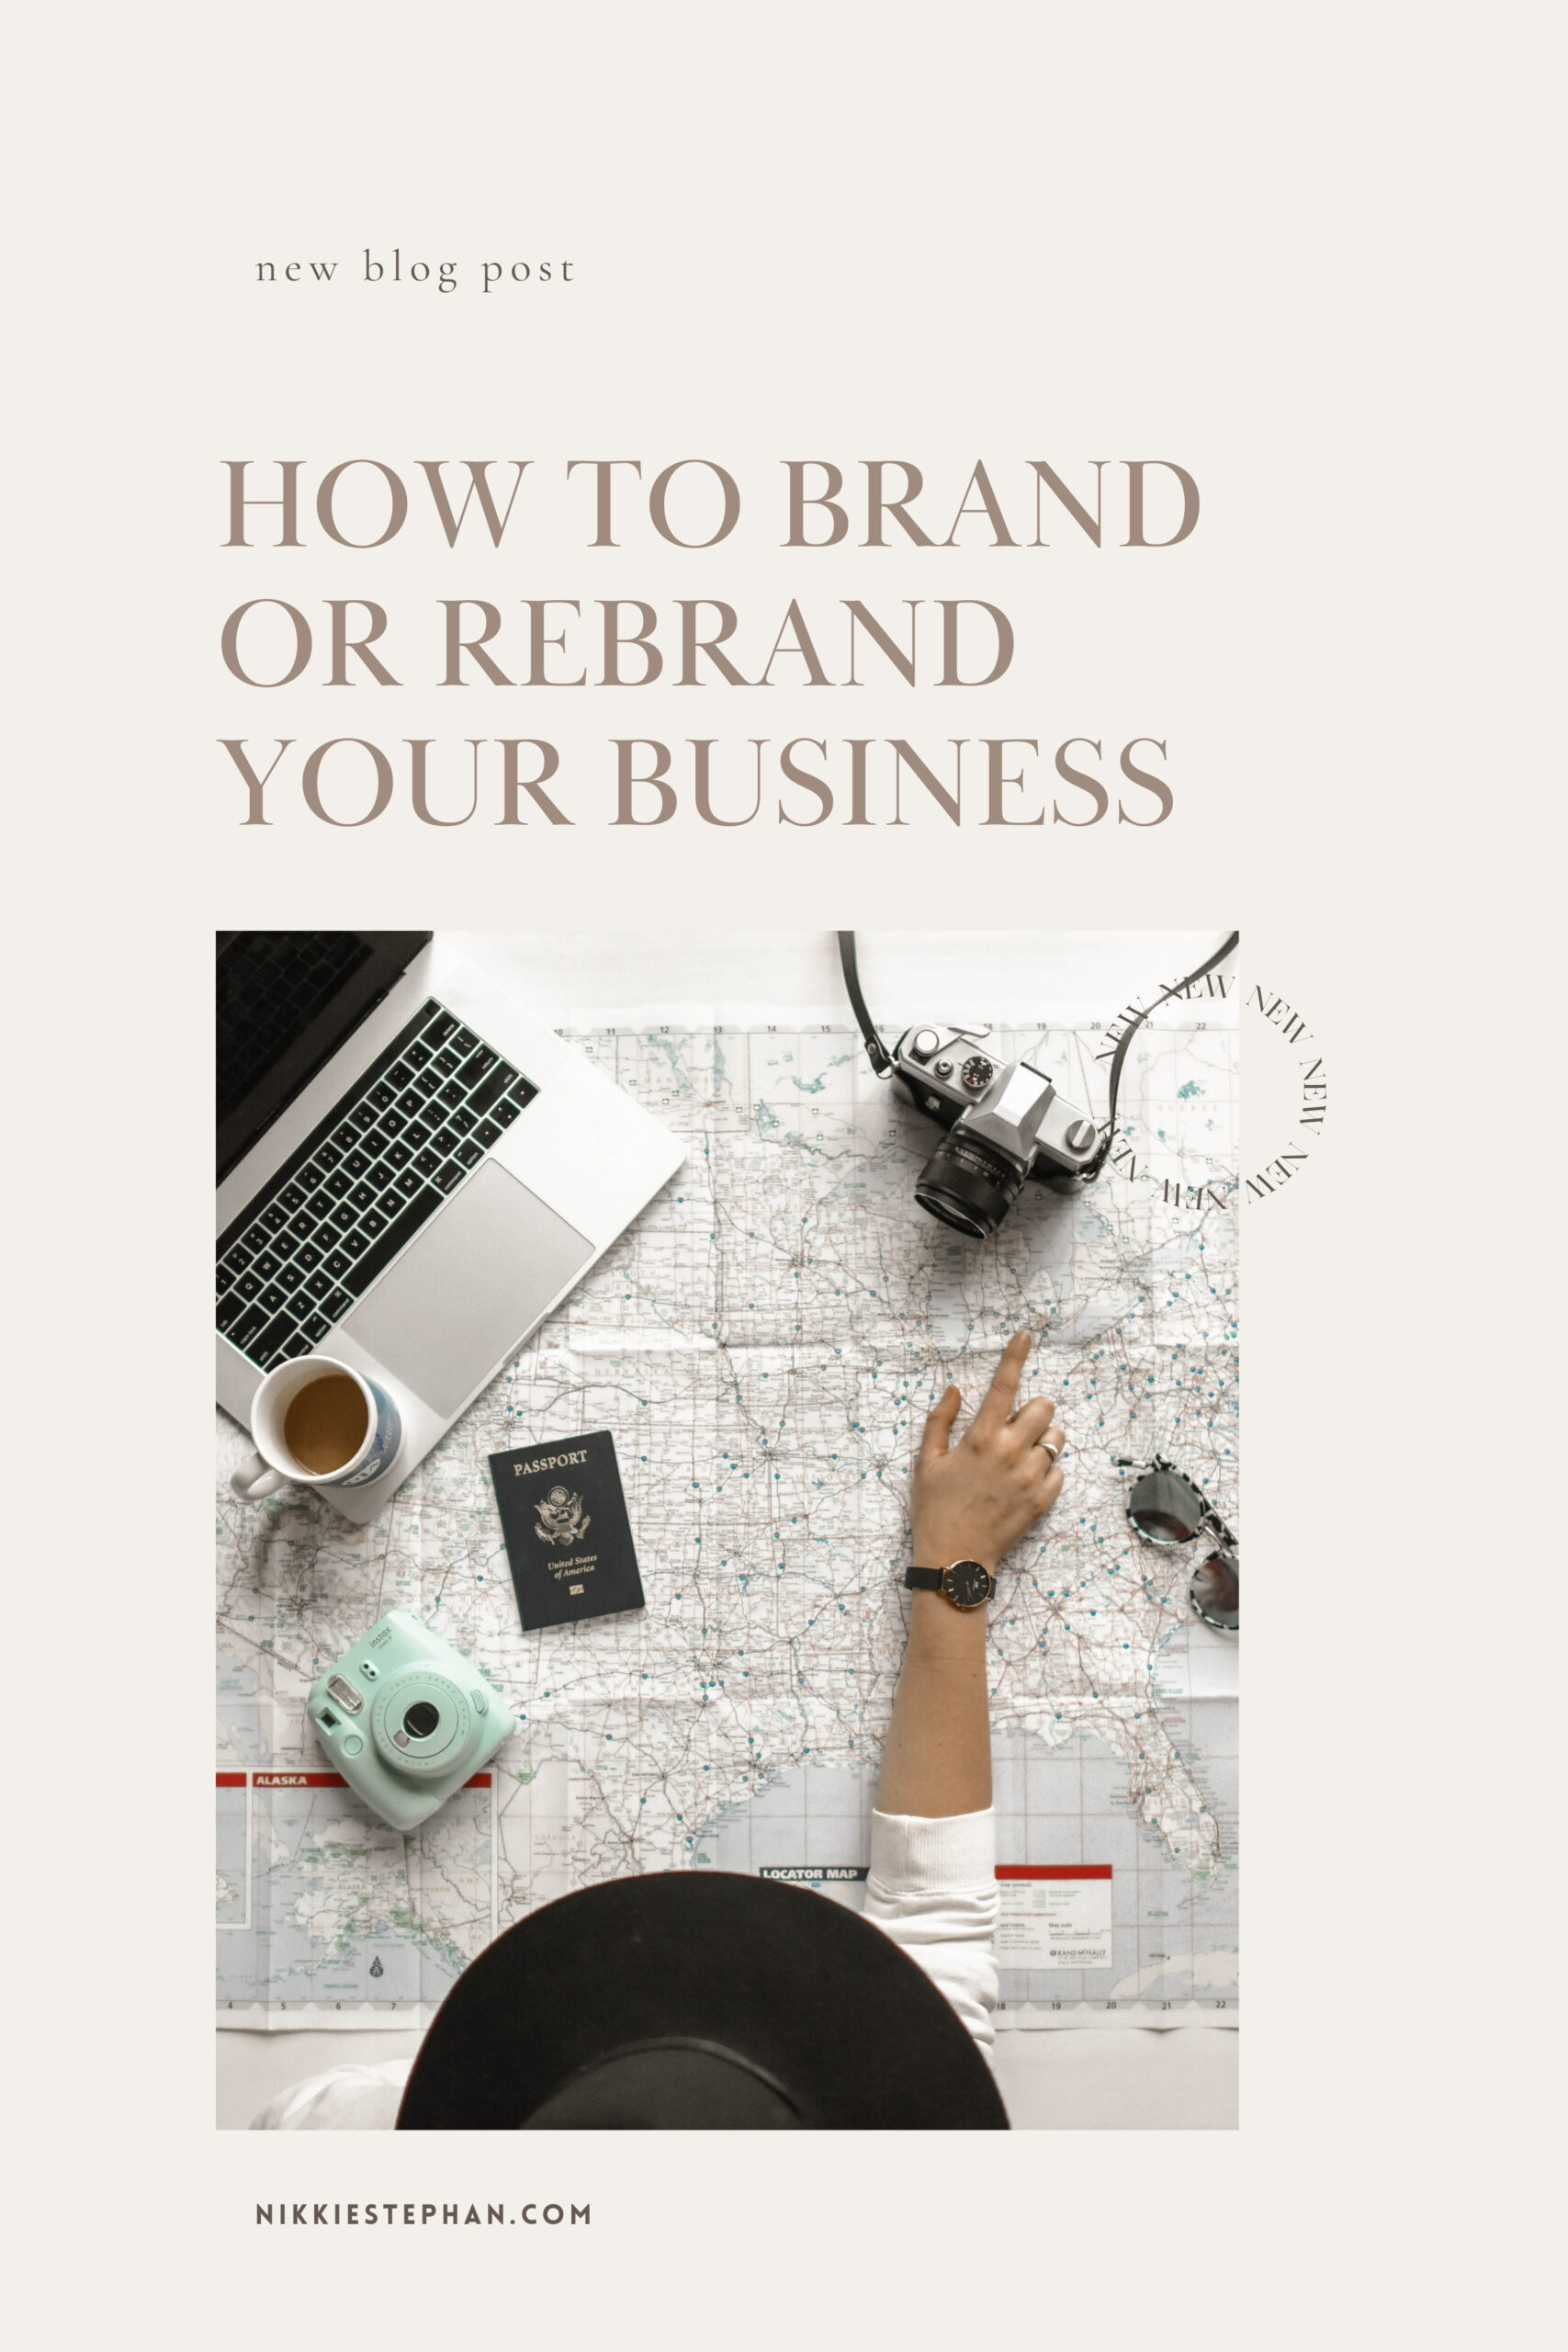 How to Brand or Rebrand your Business